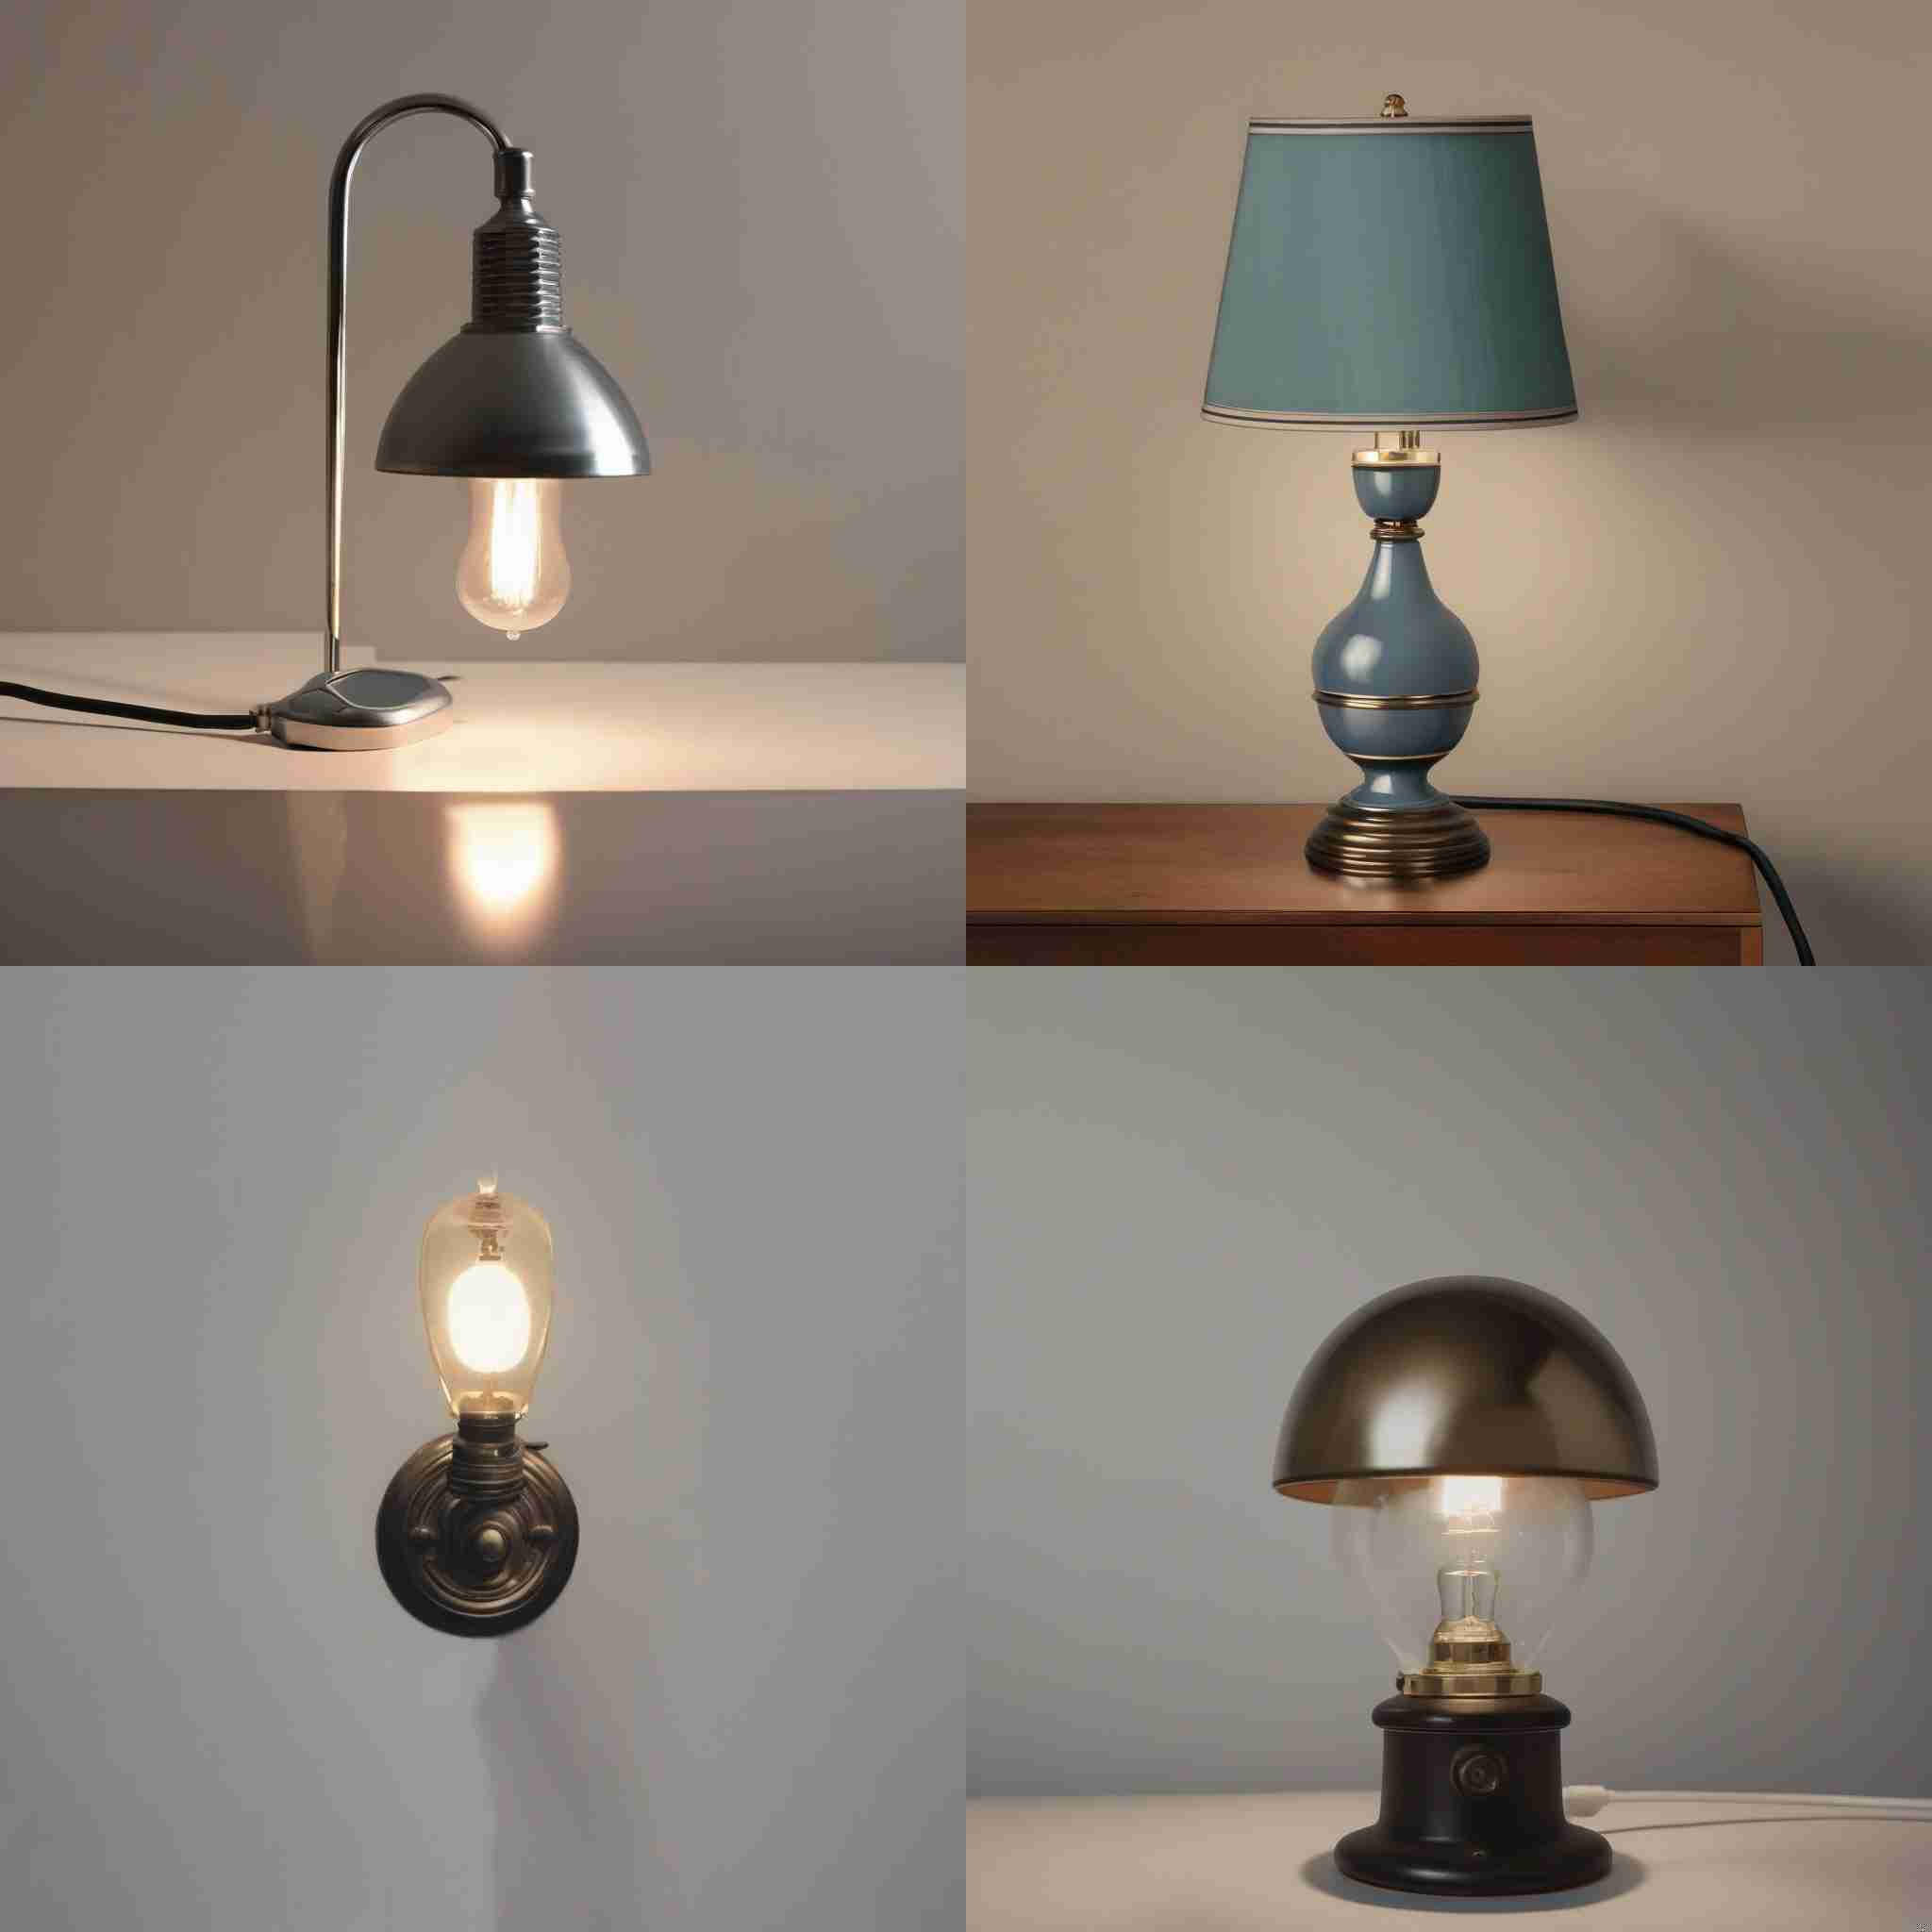 A lamp with the knob switched on